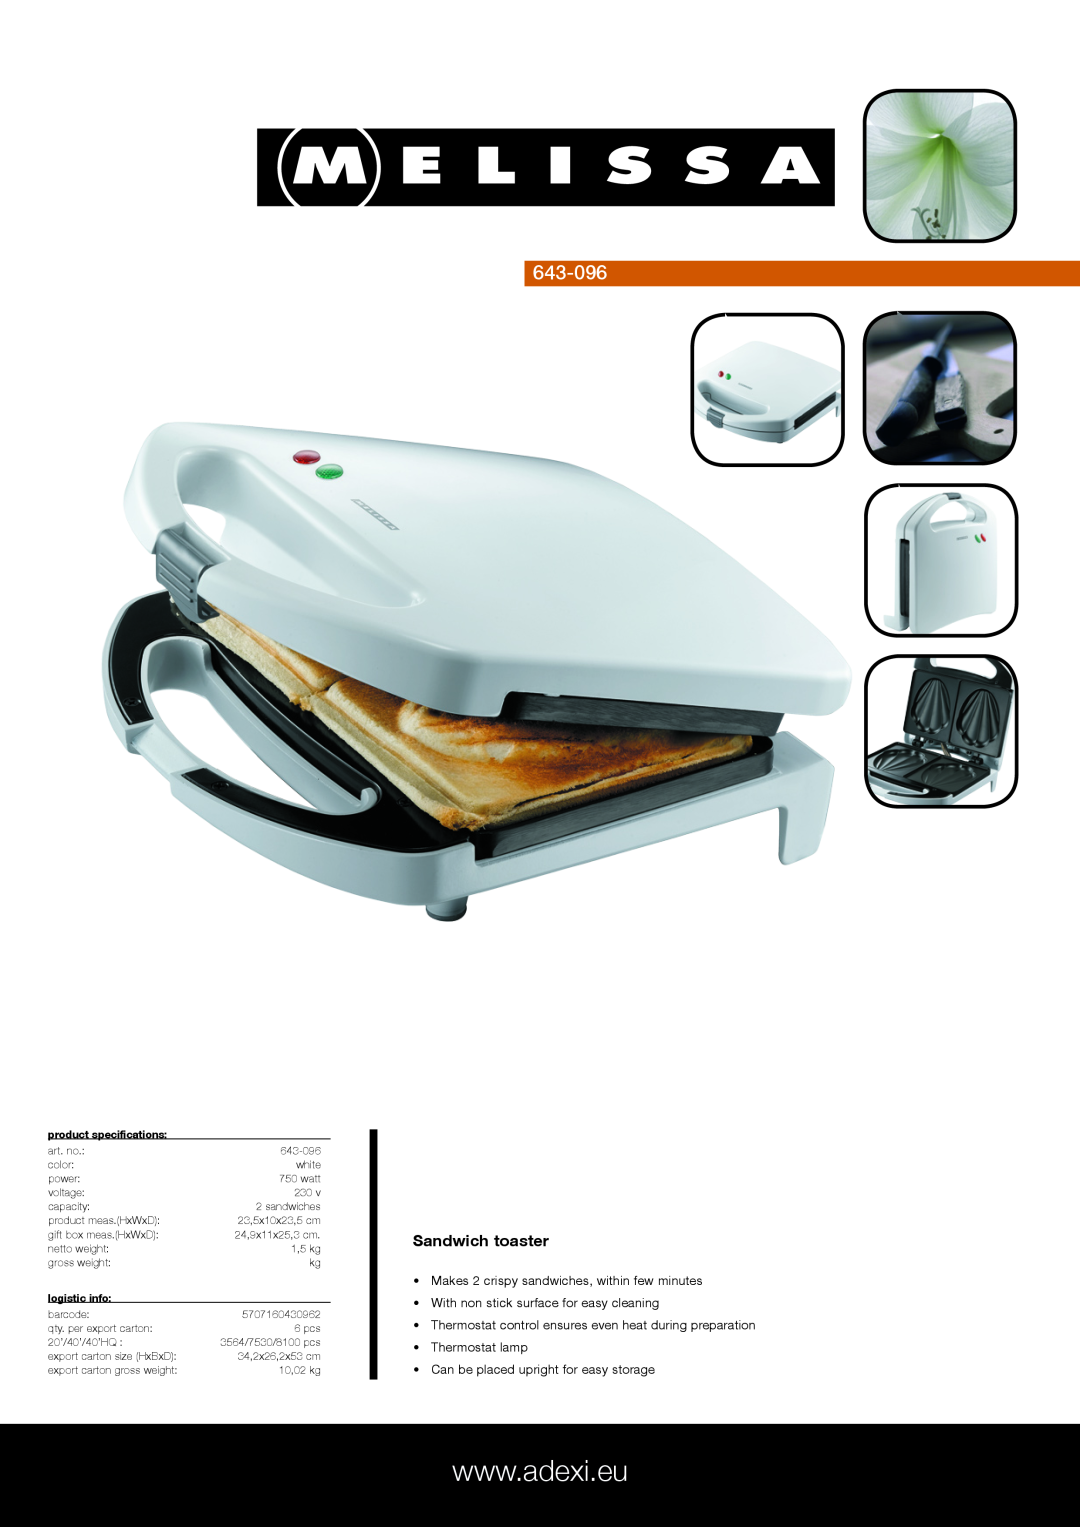 Melissa 643-096 specifications Sandwich toaster, Makes 2 crispy sandwiches, within few minutes, Thermostat lamp 